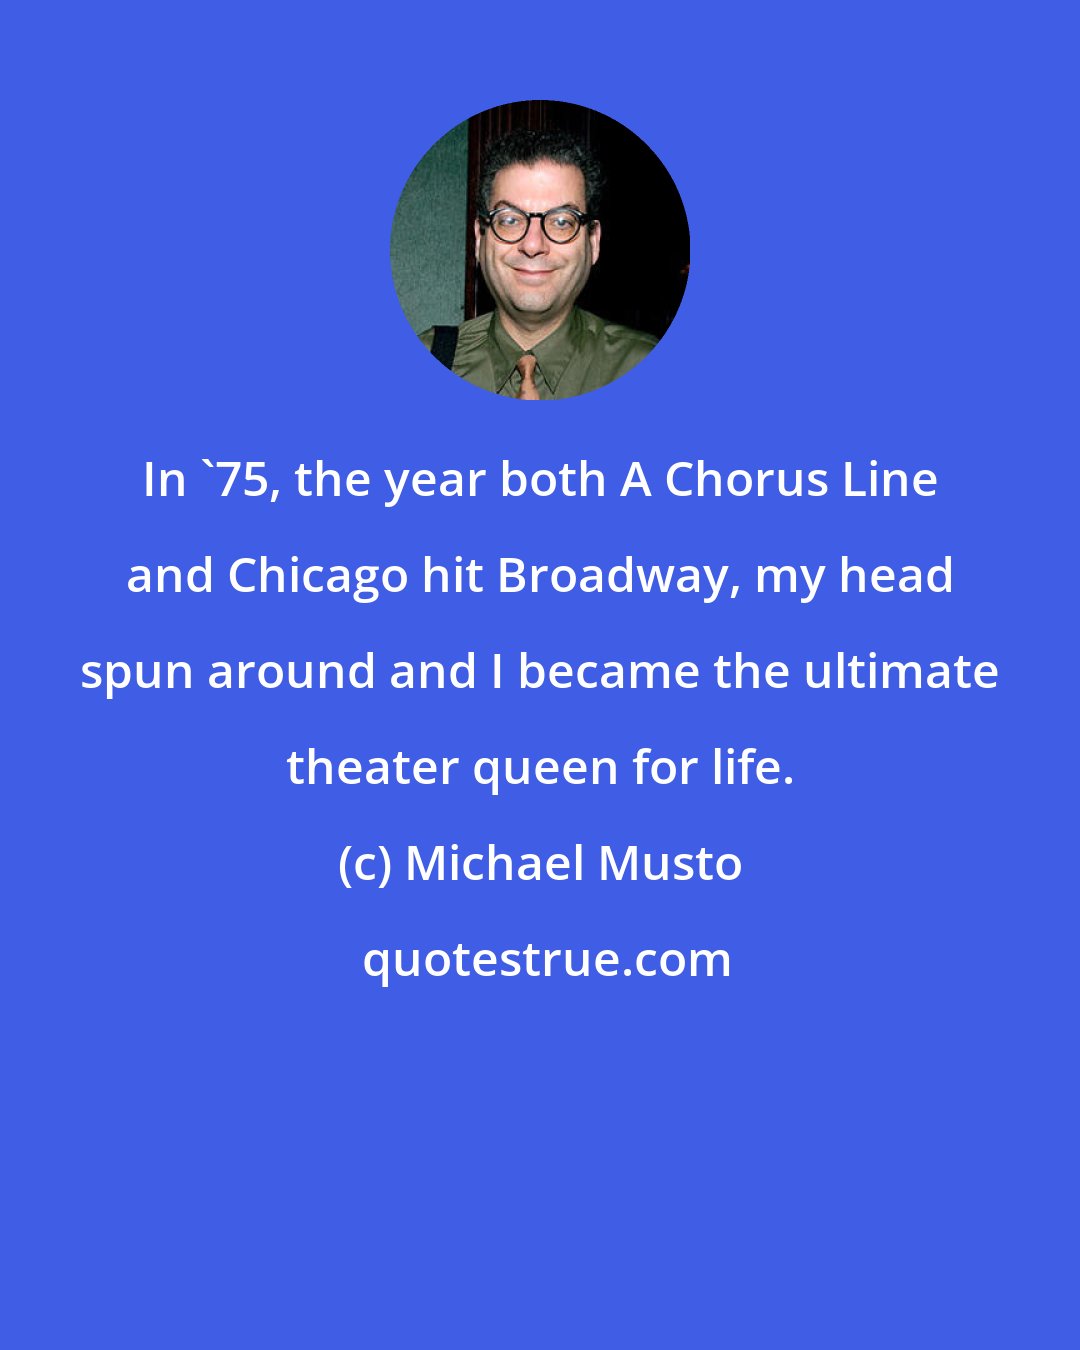 Michael Musto: In '75, the year both A Chorus Line and Chicago hit Broadway, my head spun around and I became the ultimate theater queen for life.